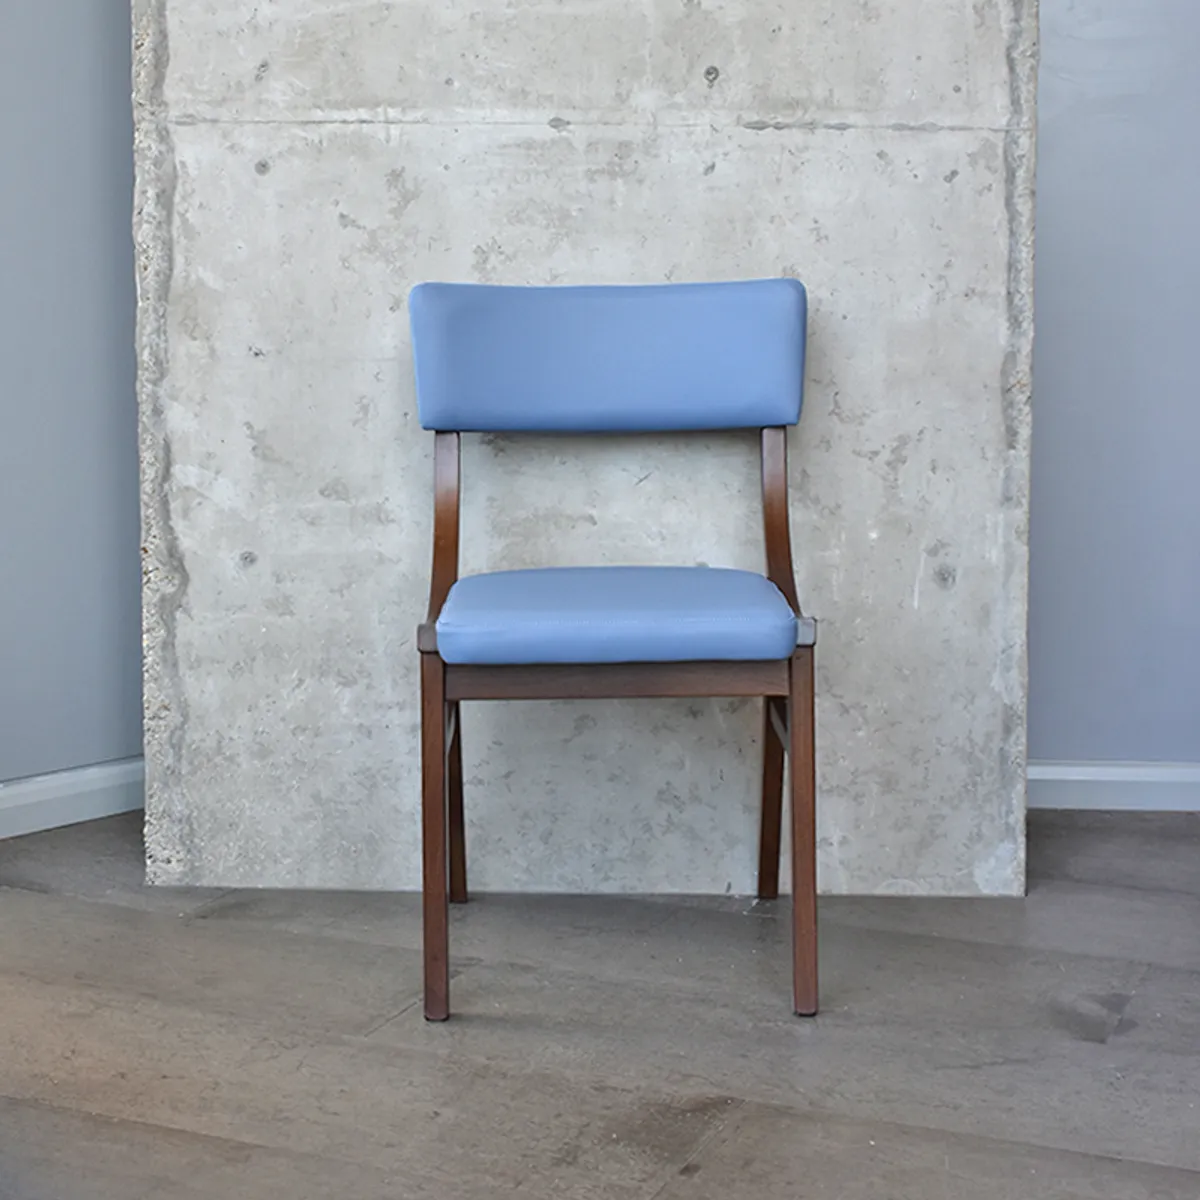 Victoria Chair New Furniture From Milan 2019 By Inside Out Contracts 030